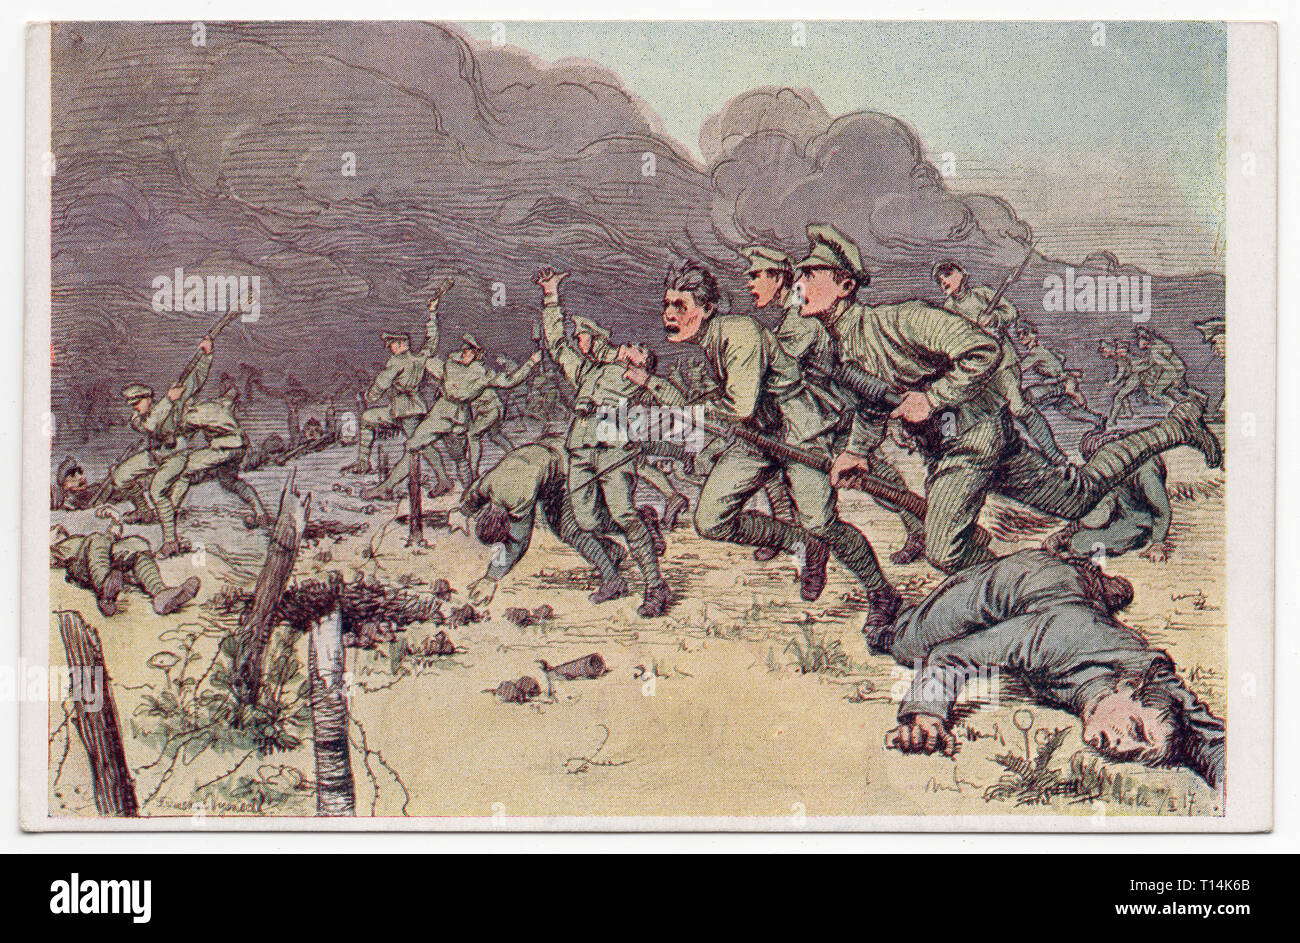 Czechoslovak soldiers on the attack depicted in the watercolour painting by Czech artist František Duchač-Vyskočil (1917) printed on the Czechoslovak vintage postcard from the series 'Pictures from the life and fights of the Czechoslovak legions in Russia' ('Pohledy ze života a bojů československých legií v Rusku') issued in Czechoslovakia in the 1920s. The attack of the Czechoslovak armed forces on the Eastern Front of the First World War is depicted. Courtesy of the Azoor Postcard Collection. Stock Photo